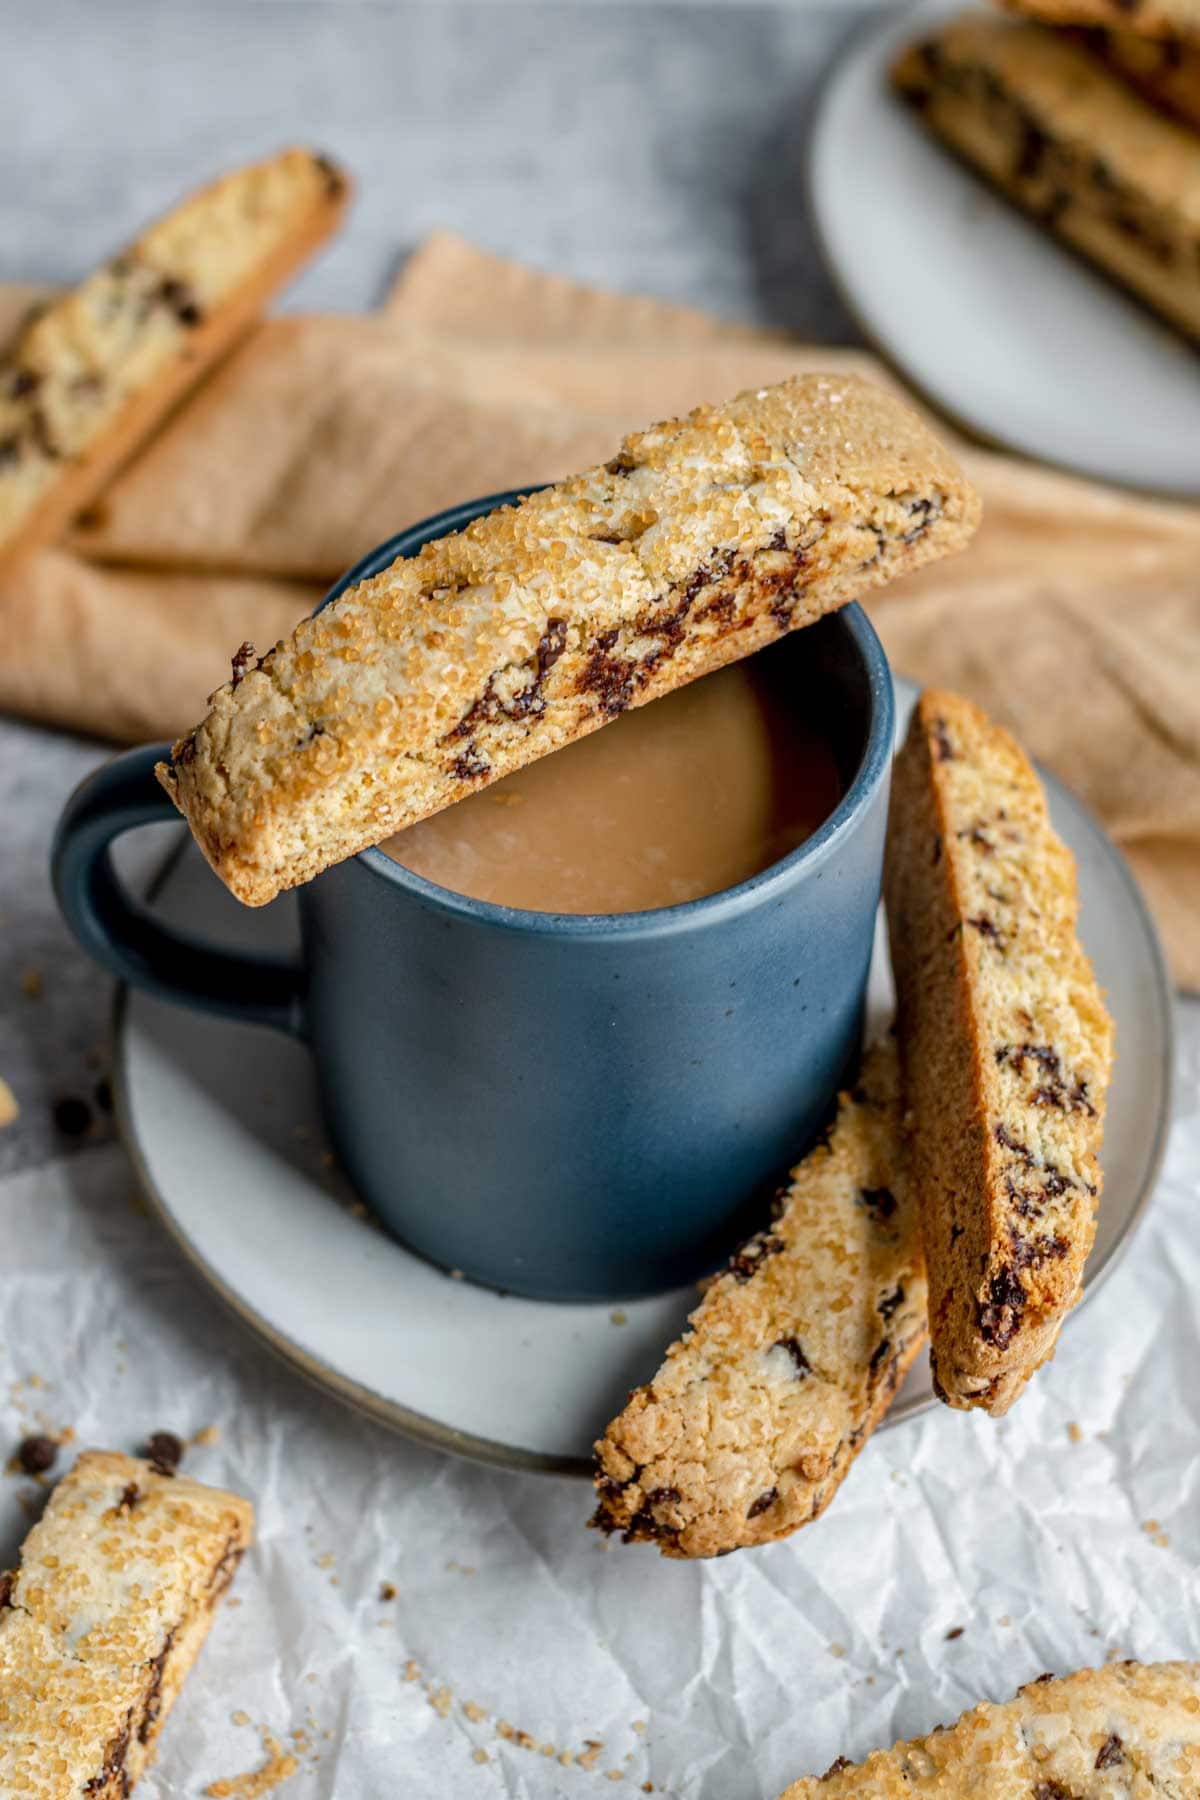 Chocolate Chip Biscotti baked cookie being resting on cup of coffee with other cookies on plate